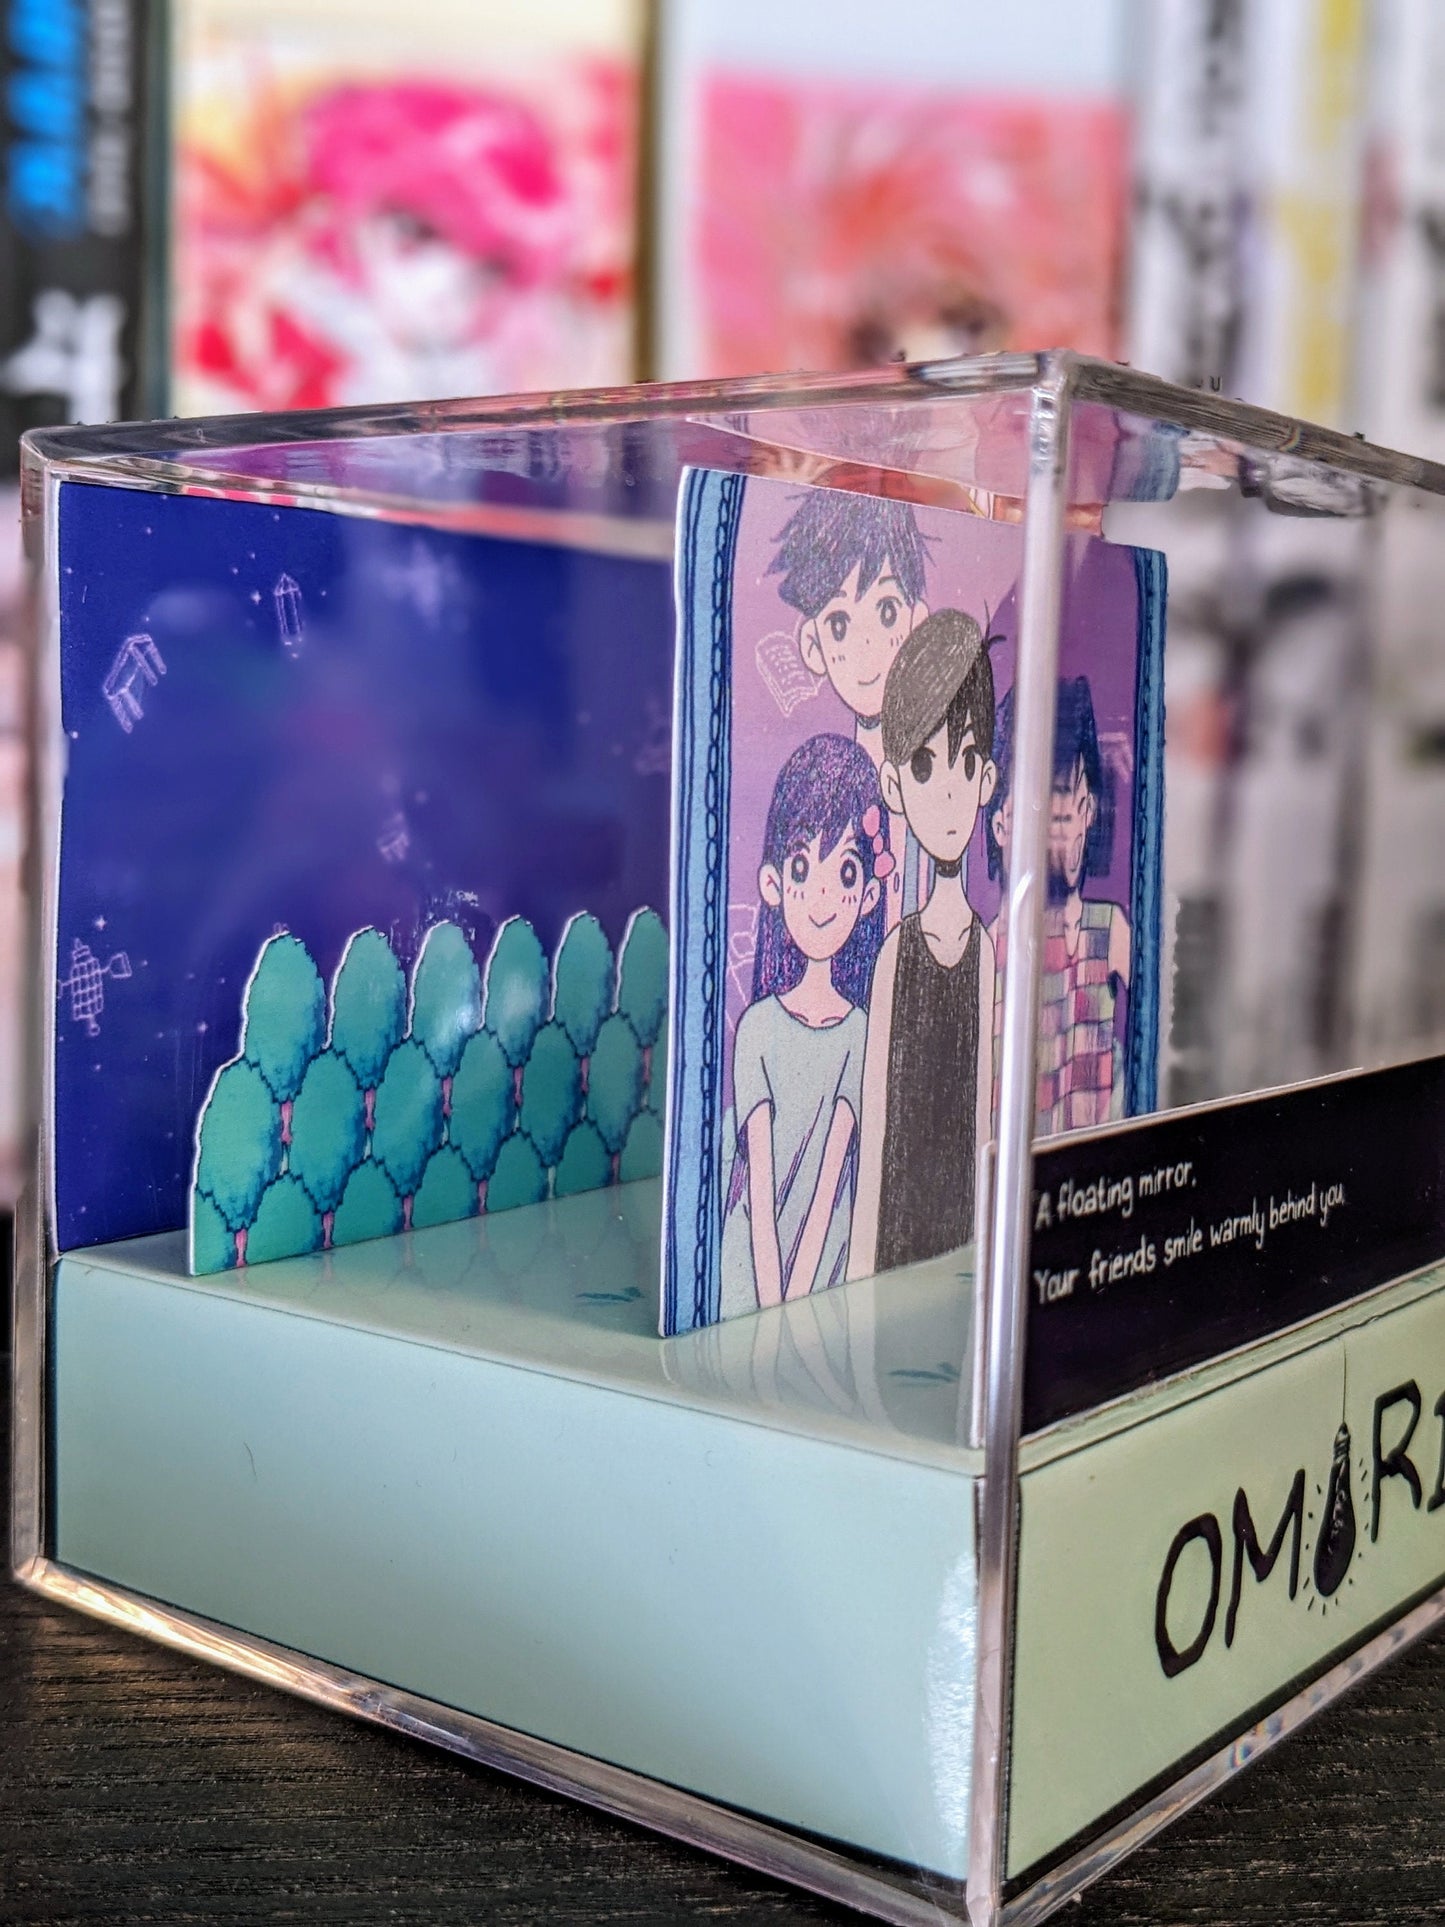 OMORI Your Friends Smile Warmly Behind You Floating Mirror 3D cube diorama